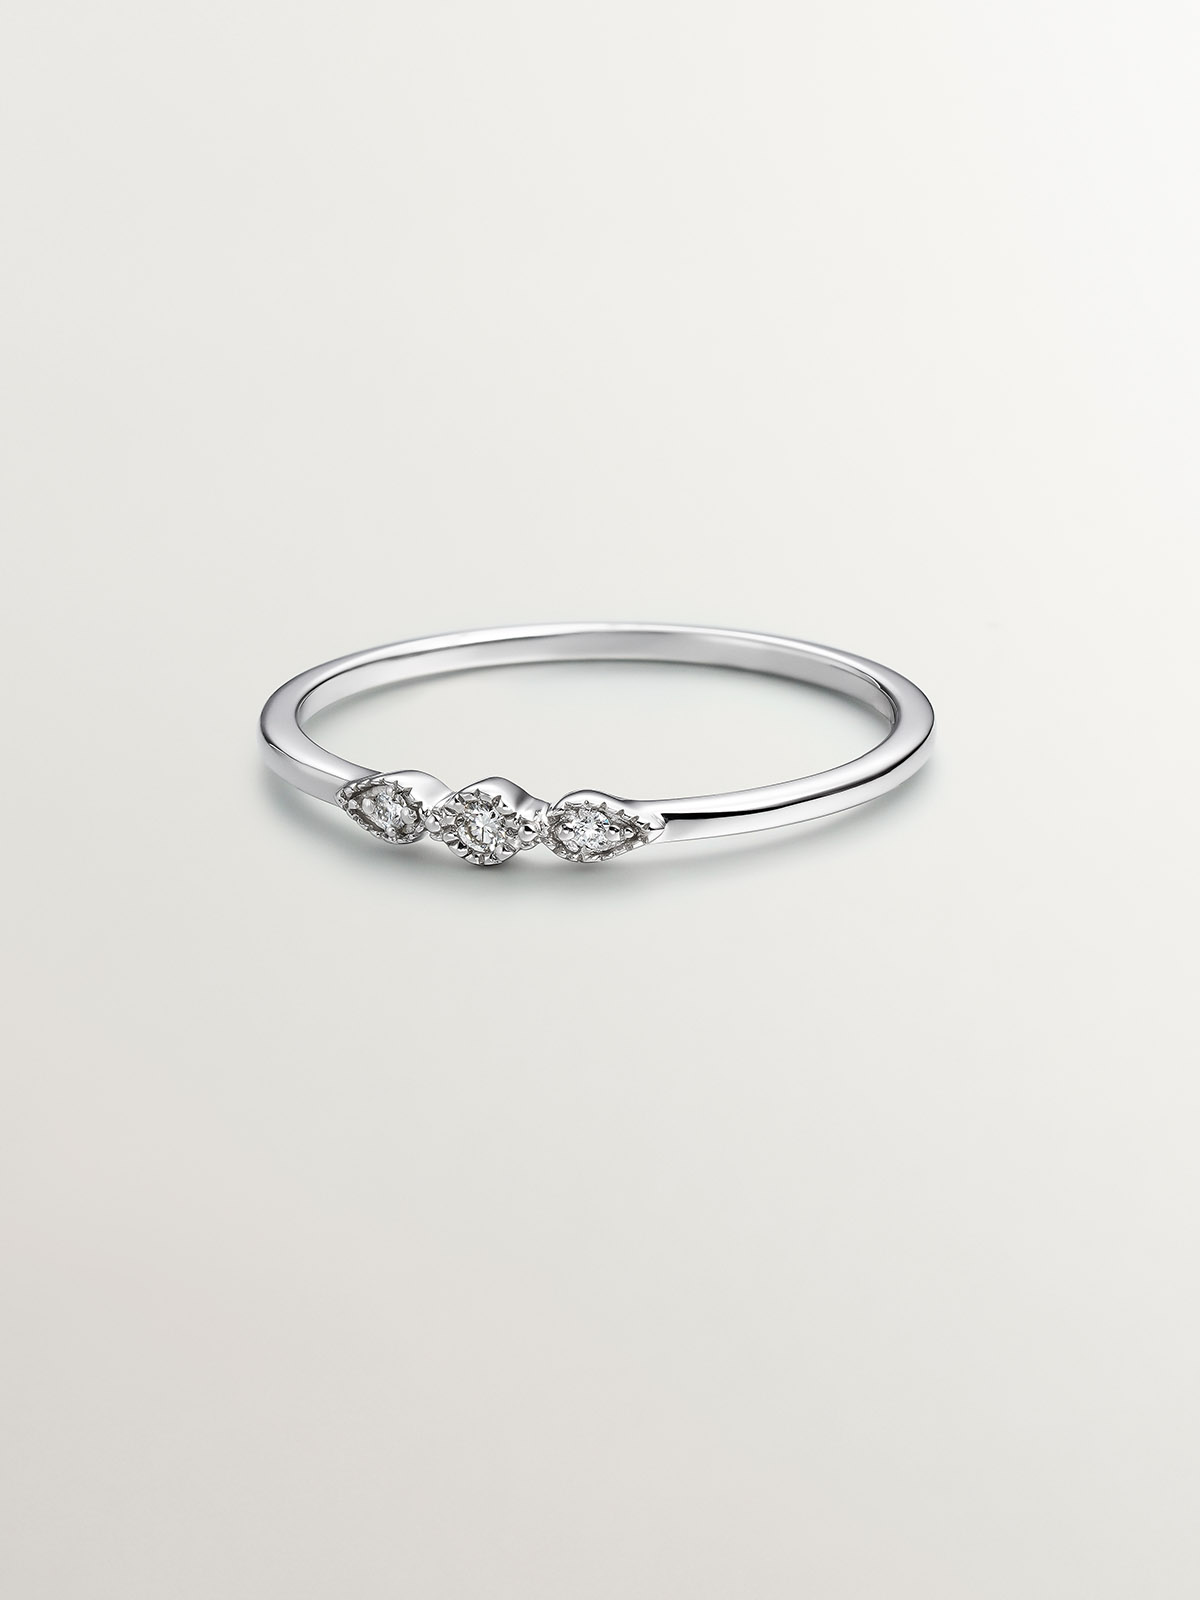 9K White gold triple ring with 0.027 diamonds.